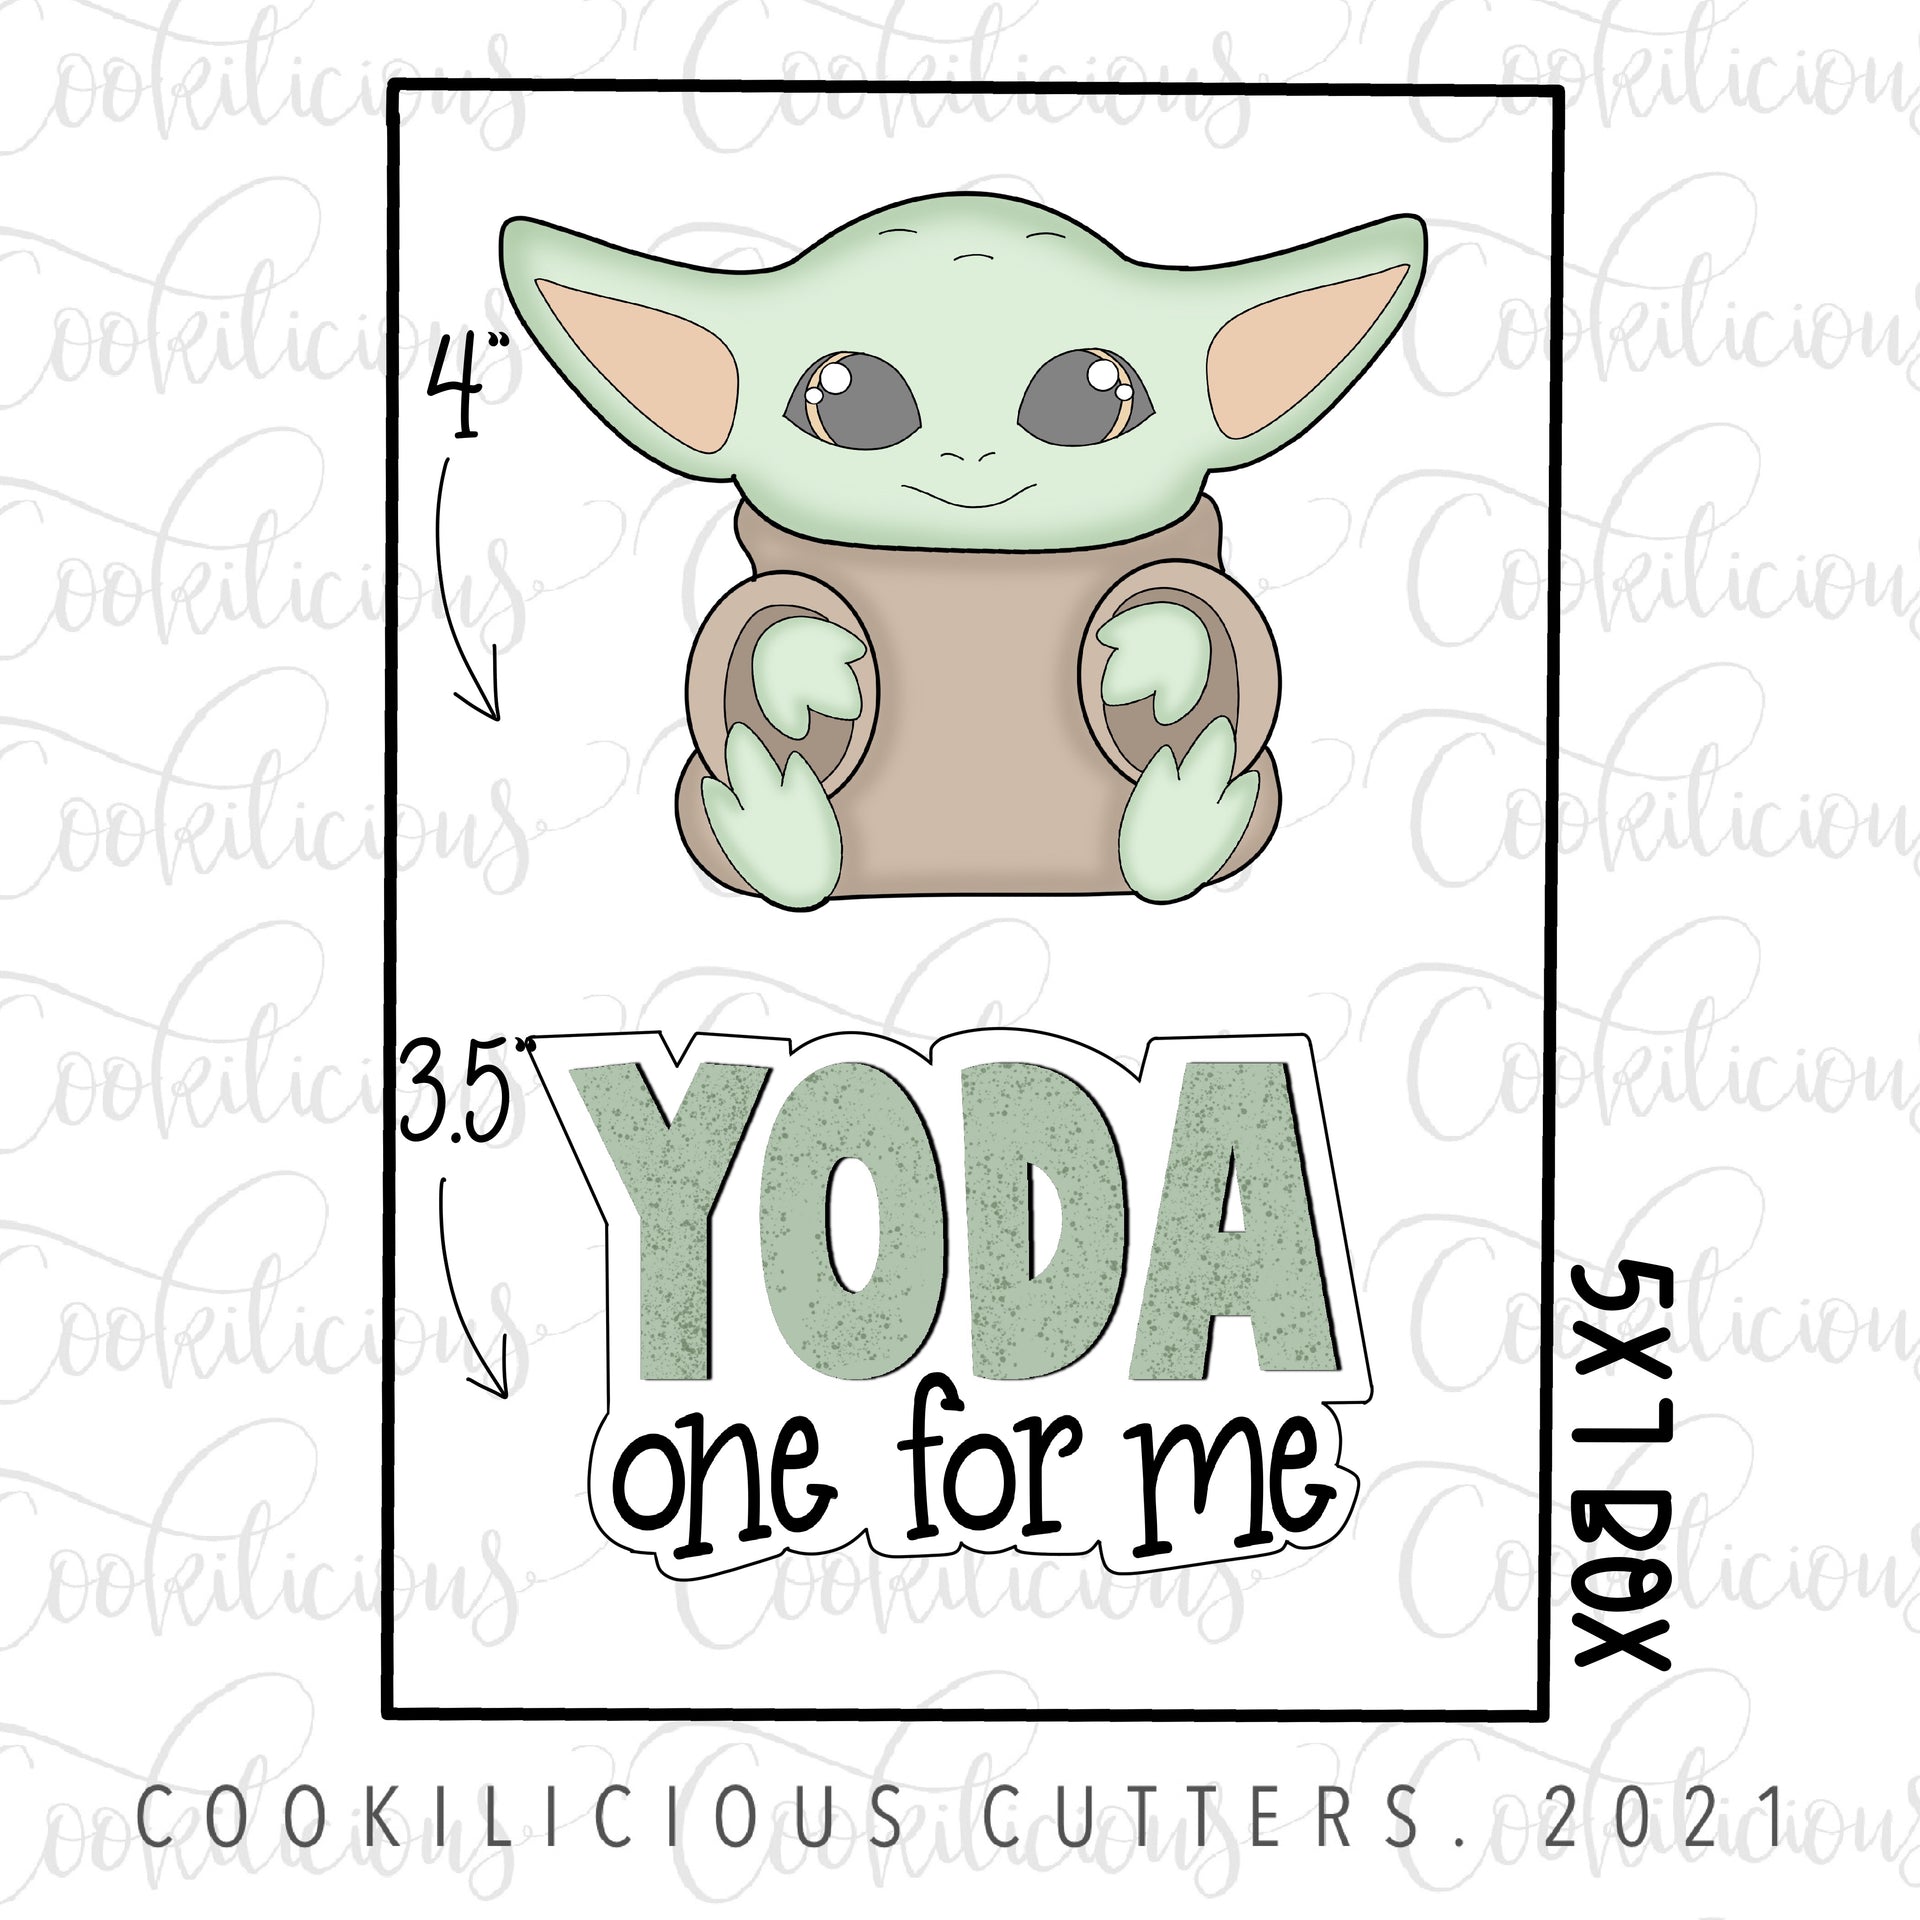 Yoda one for me. – Brainsick Biscuit